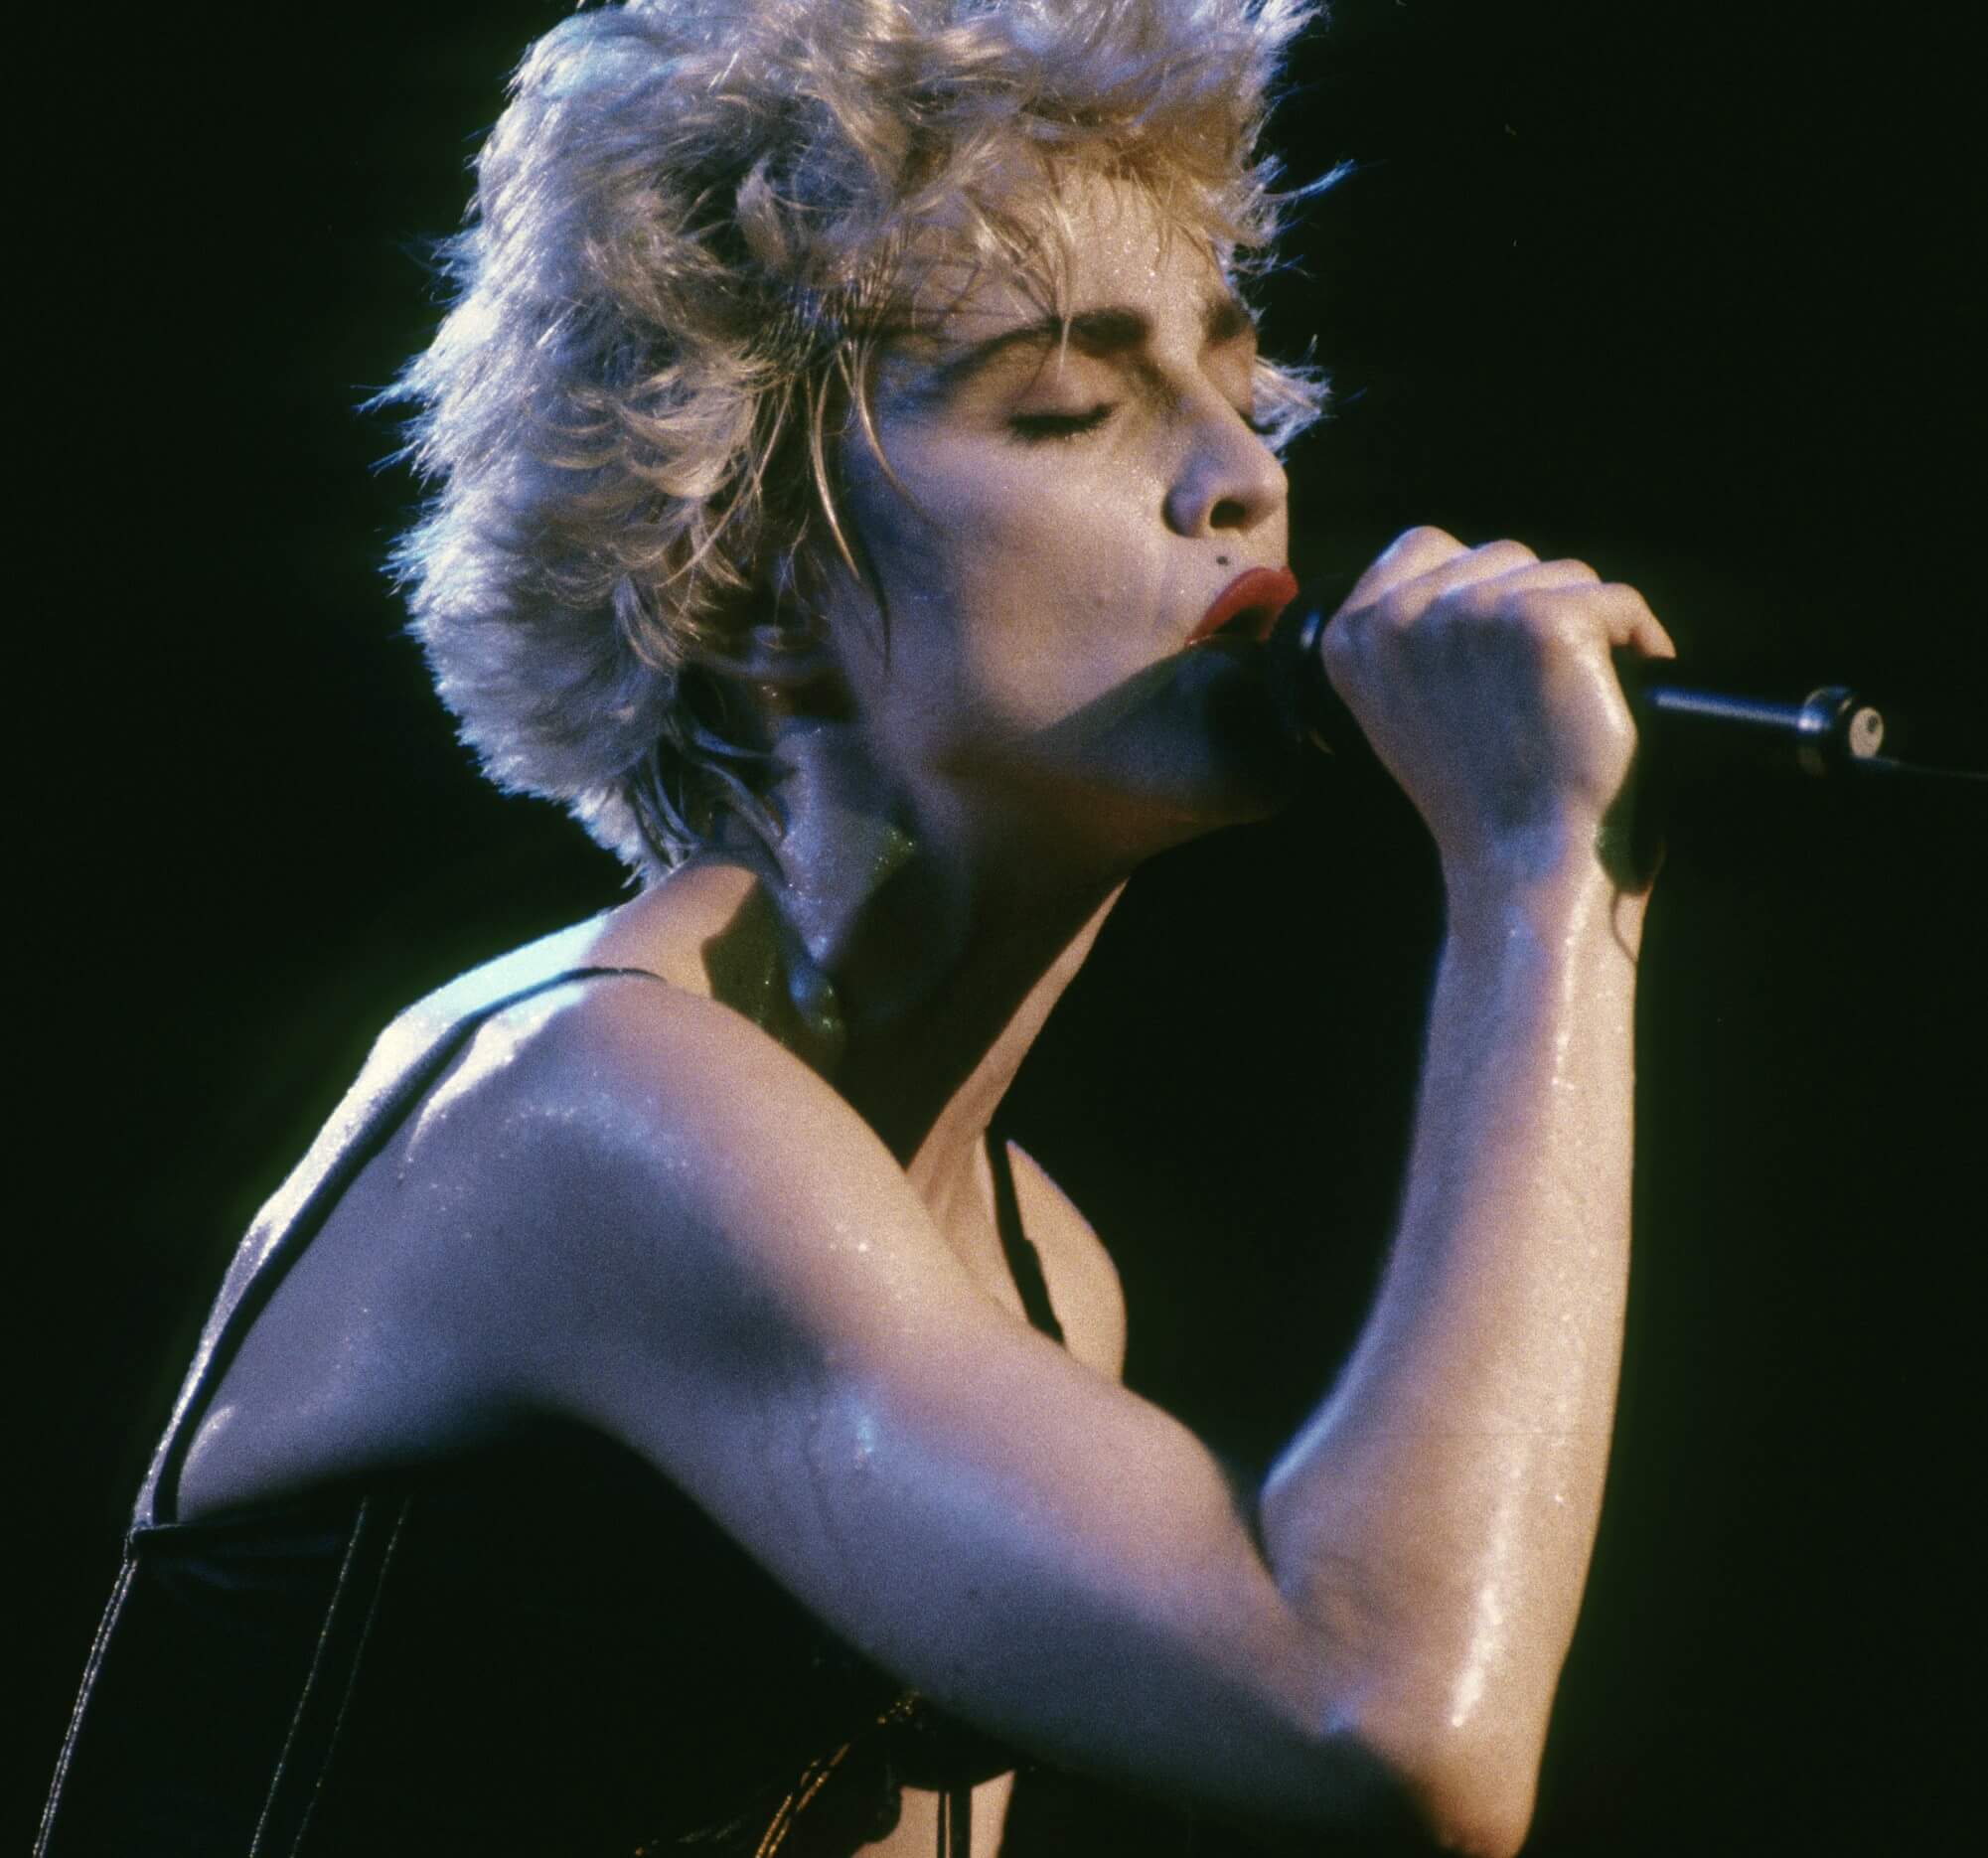 "Like a Virgin" singer Madonna with a microphone